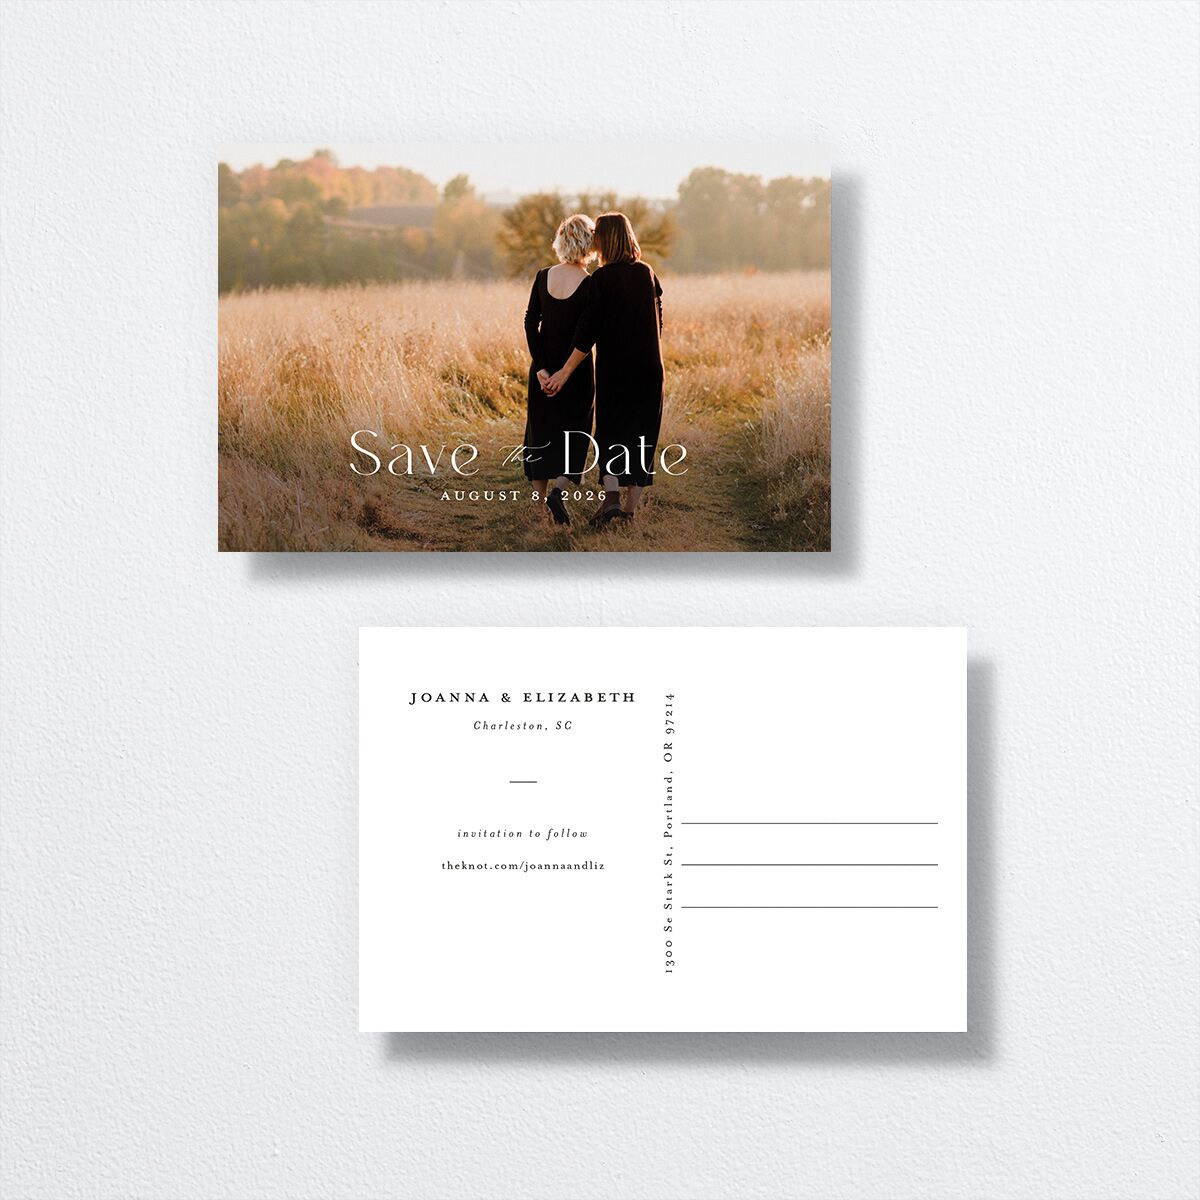 Refined Save The Date Postcards front-and-back